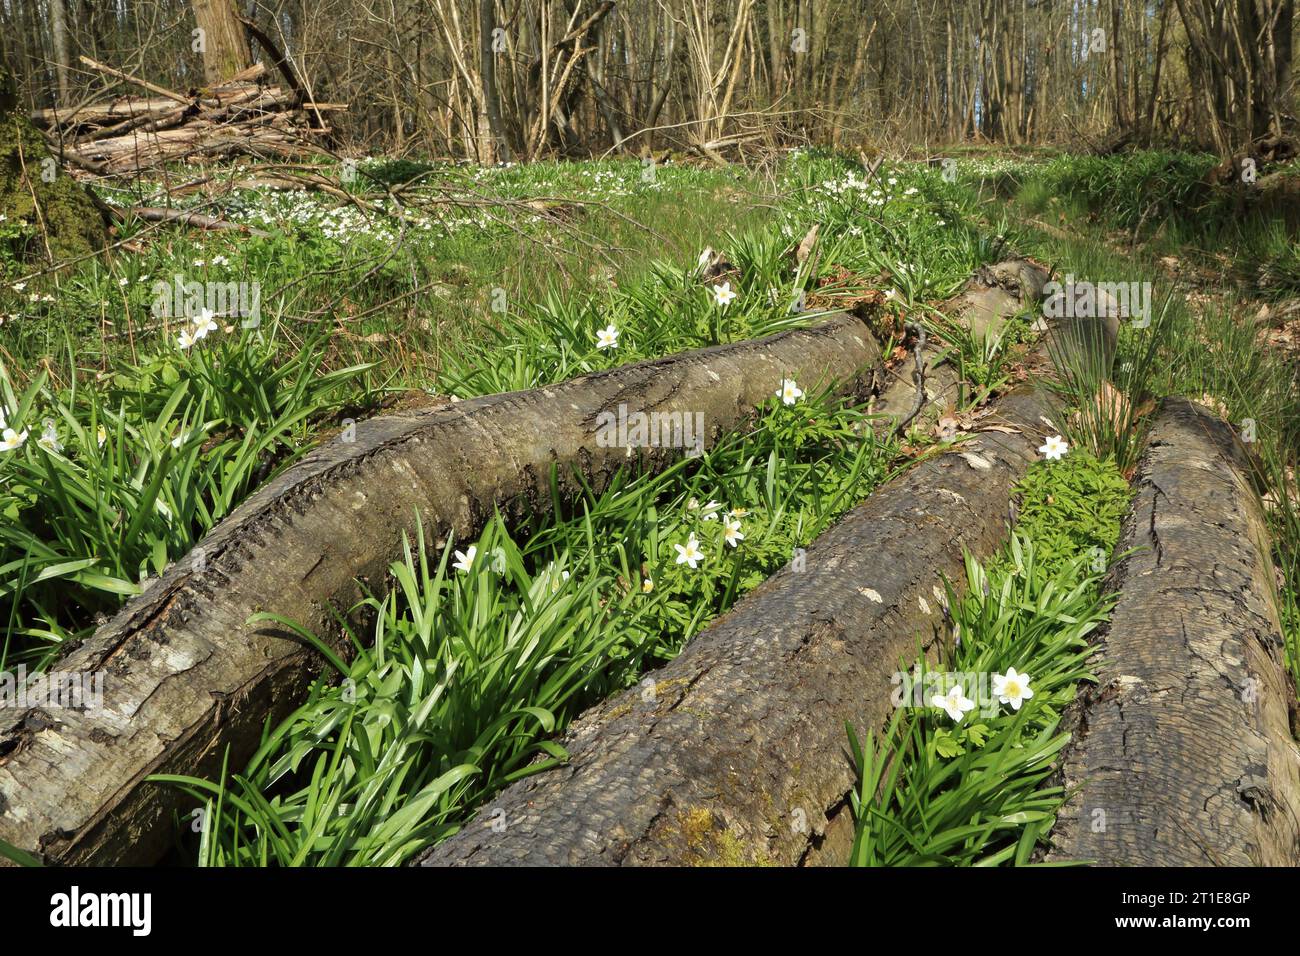 Fallen tree trunks lying on woodland floor in ancient woods at Spong Woods, Elmsted, Ashford, Kent, England, United Kingdom Stock Photo